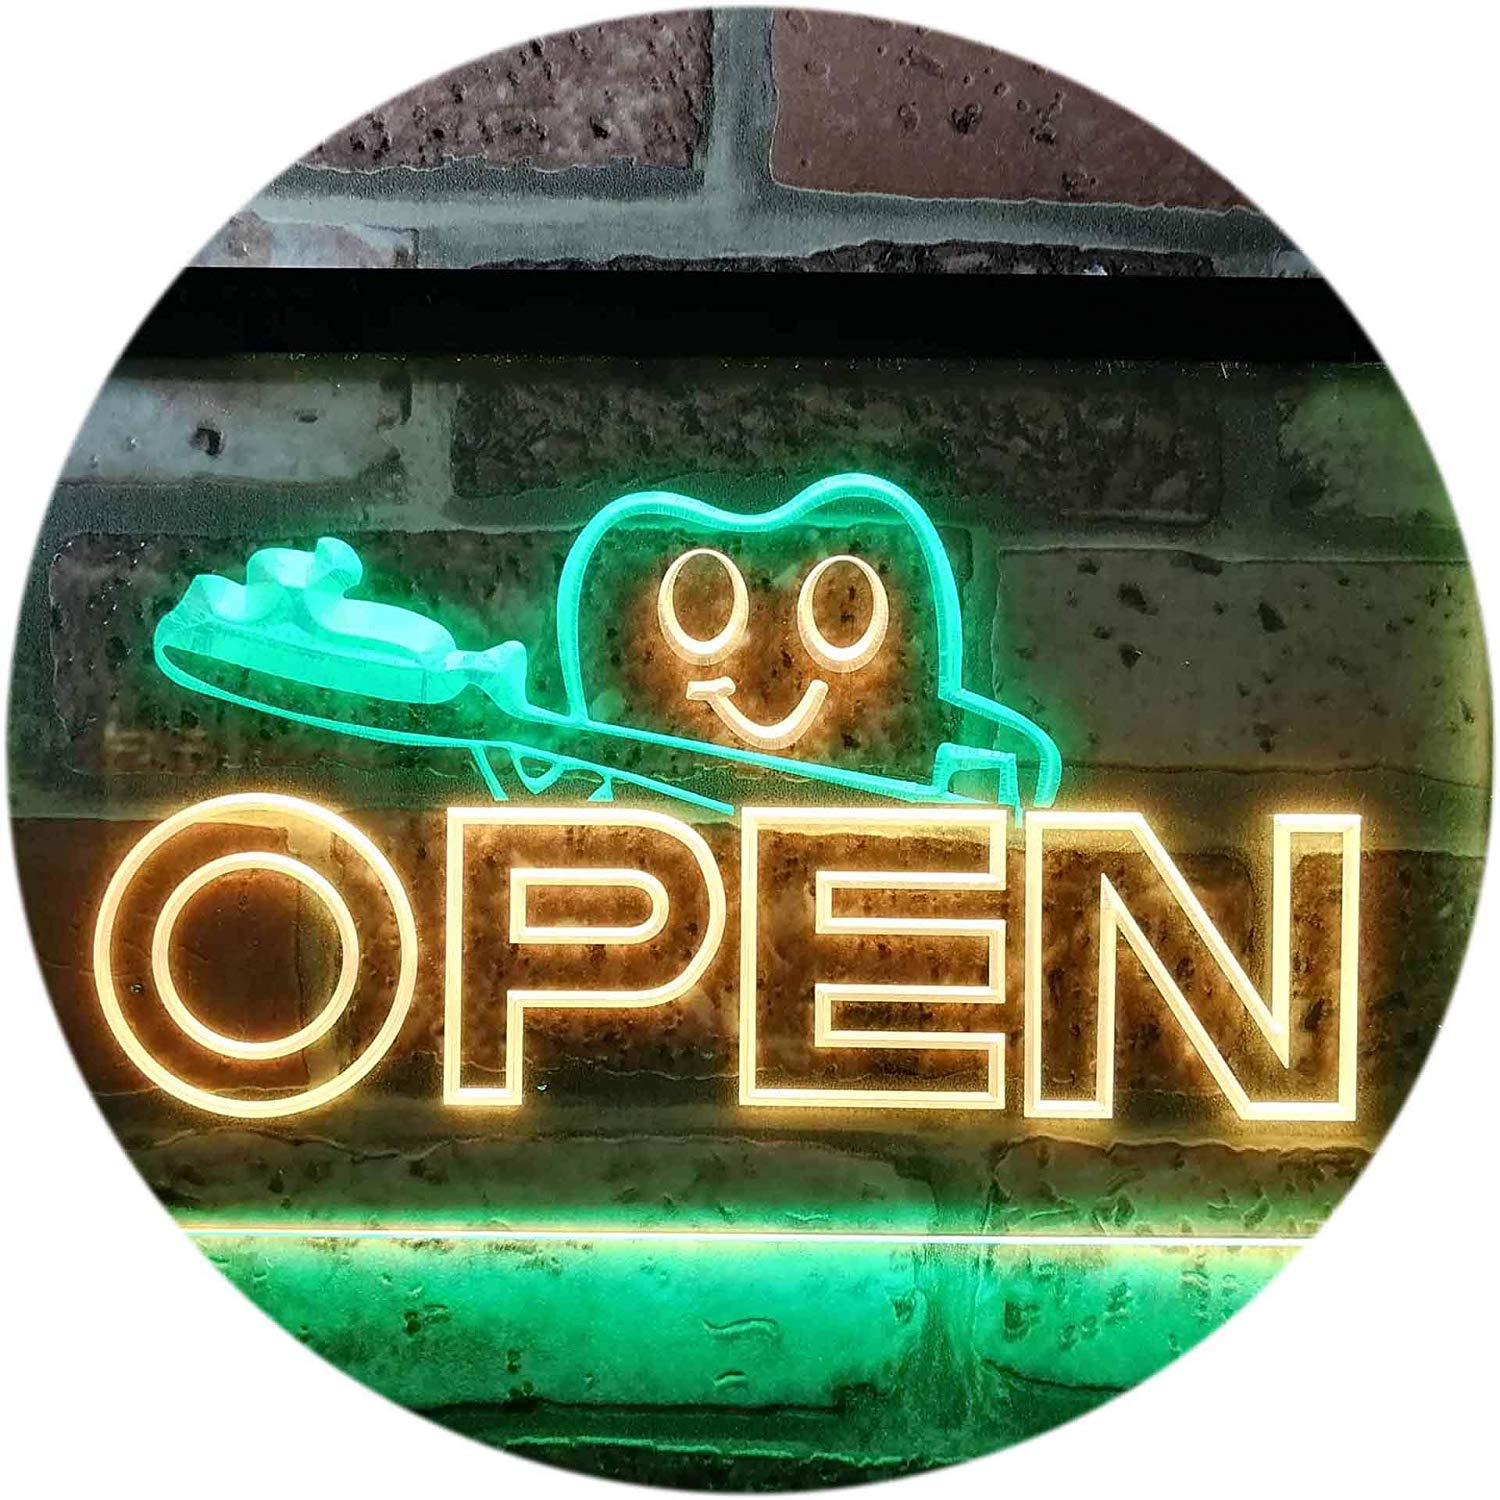 Open Toothbrush Dentist LED Neon Light Sign - Way Up Gifts